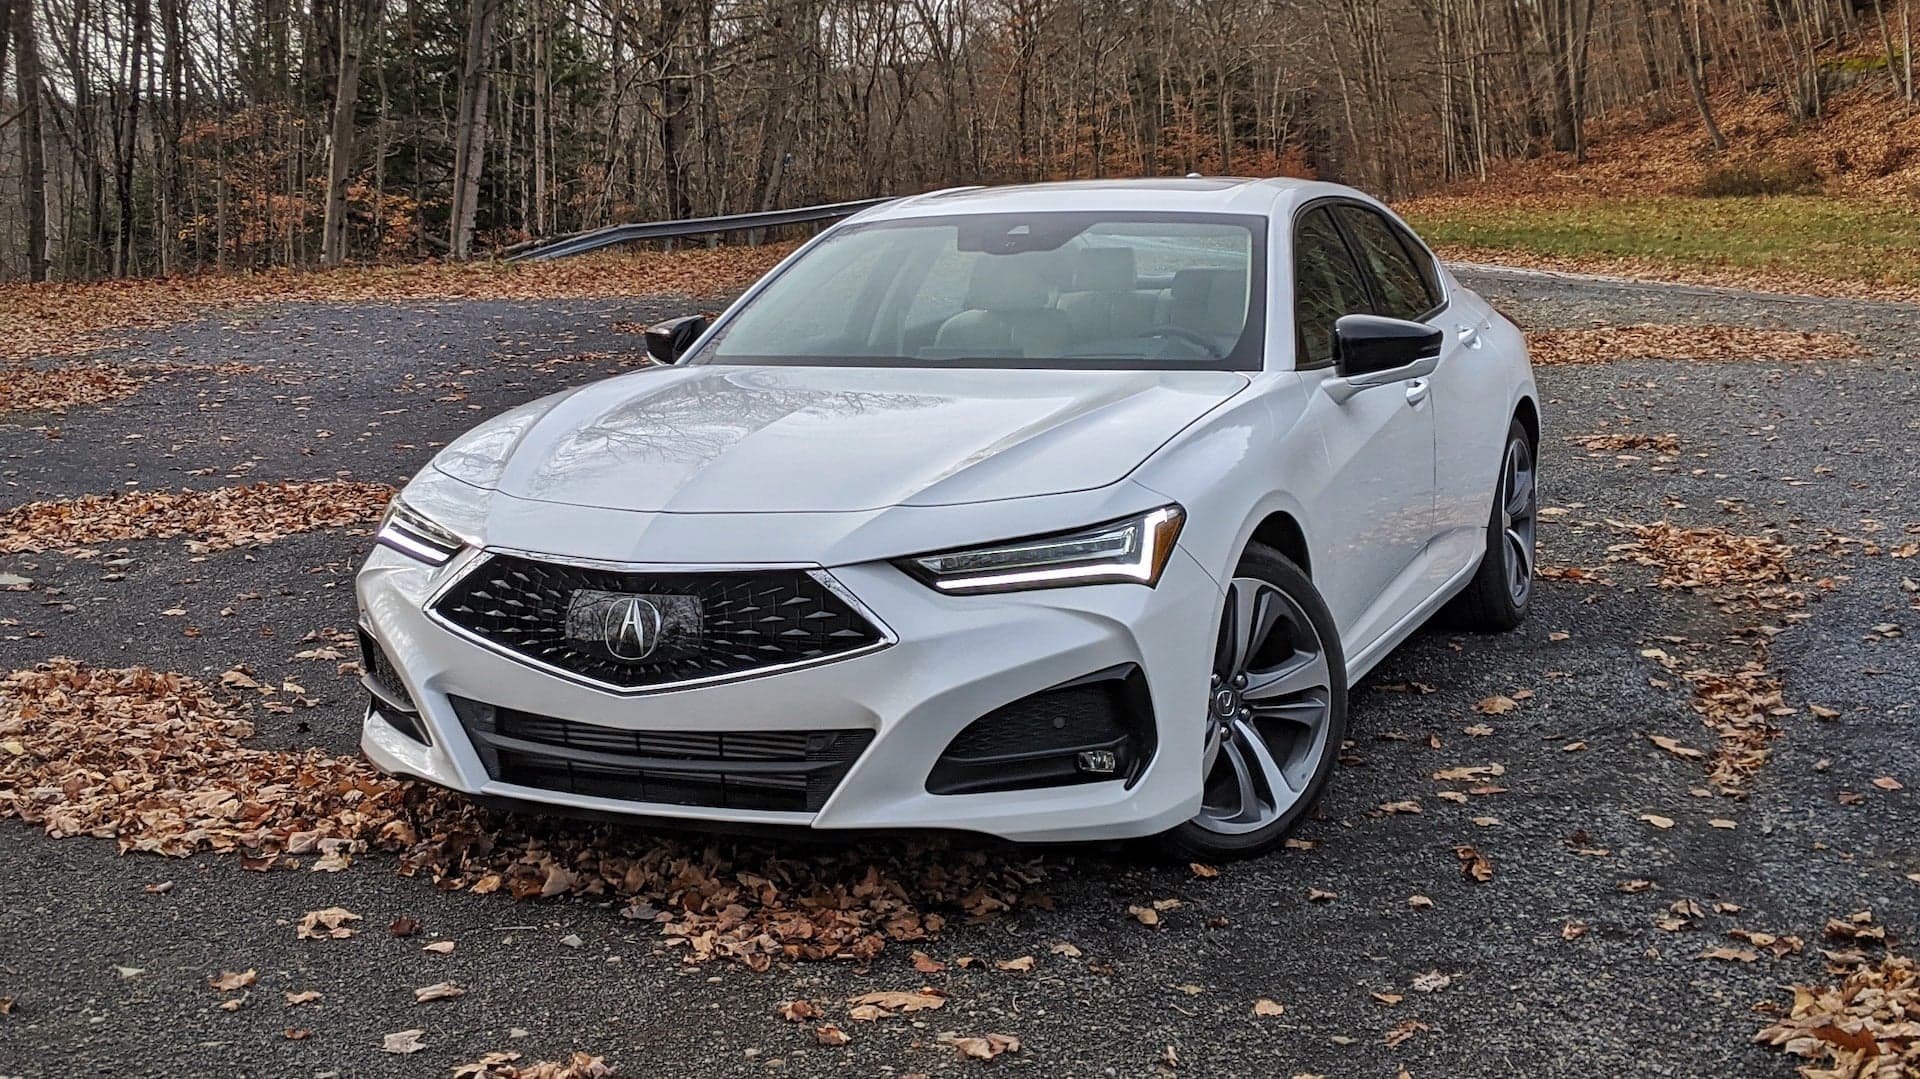 2021 Acura TLX Review: A Beautiful Dancer That Can’t Throw a Punch